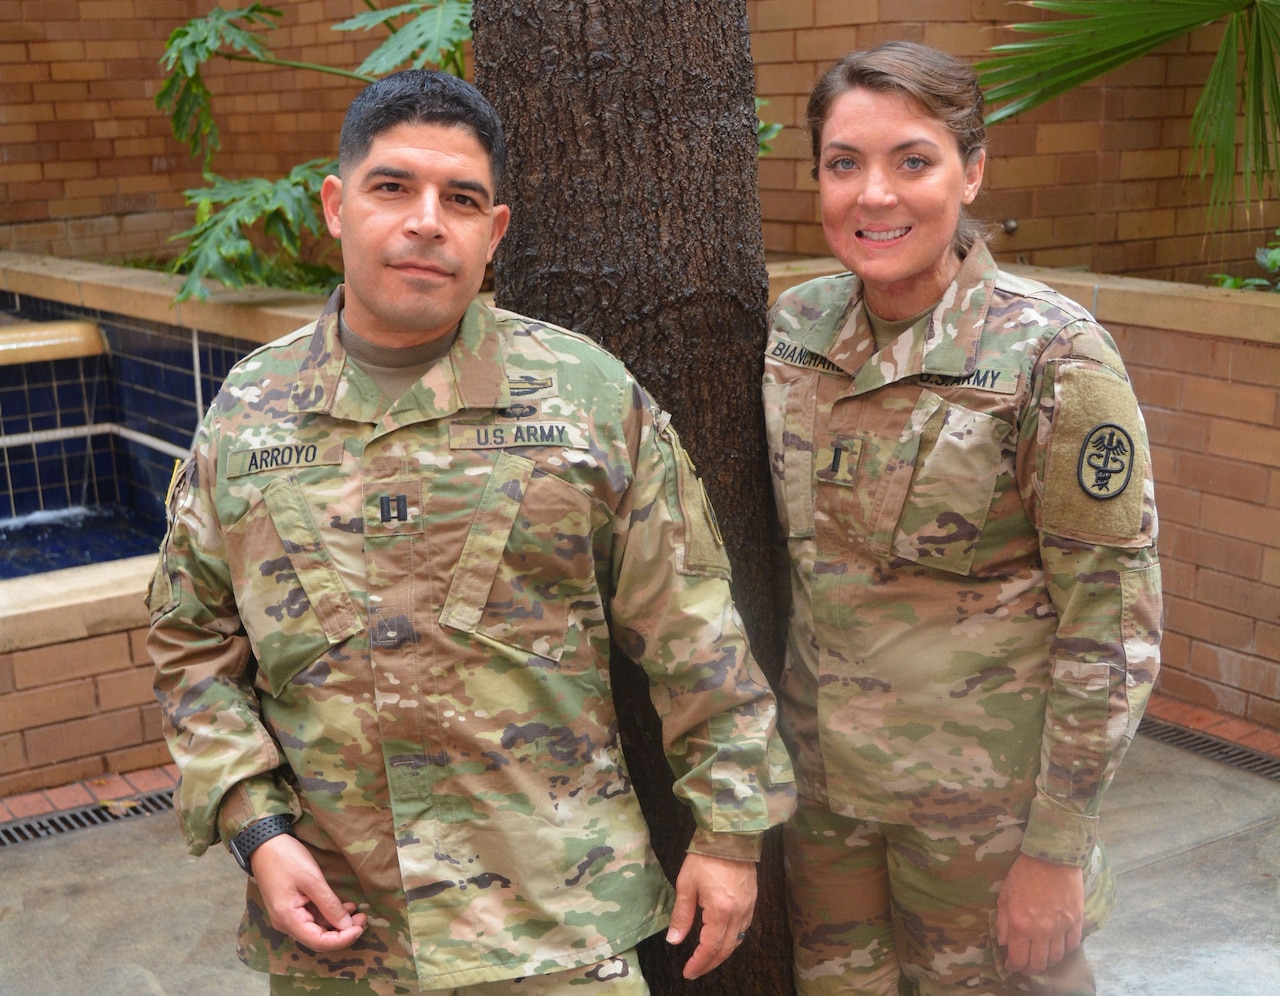 Army Capt. Katie Ann Blanchard and Army Capt. John Arroyo are survivors of separate incidents of workplace violence.